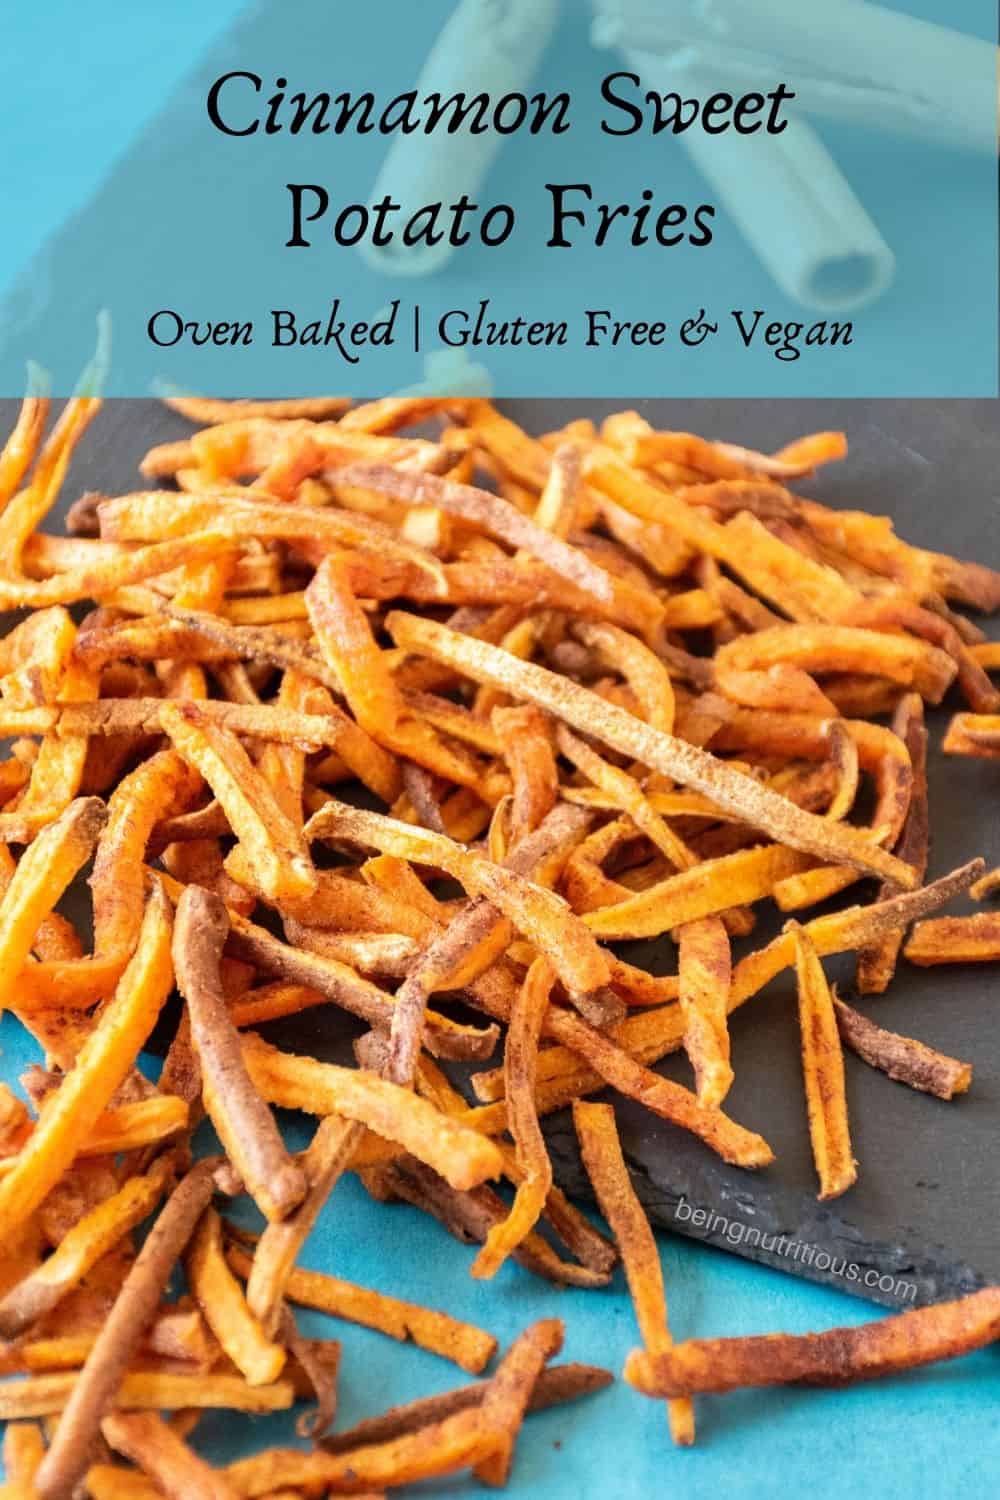 Pile of sweet potato French fries. Text overlay: Cinnamon Sweet Potato Fries; oven baked, gluten free and vegan.